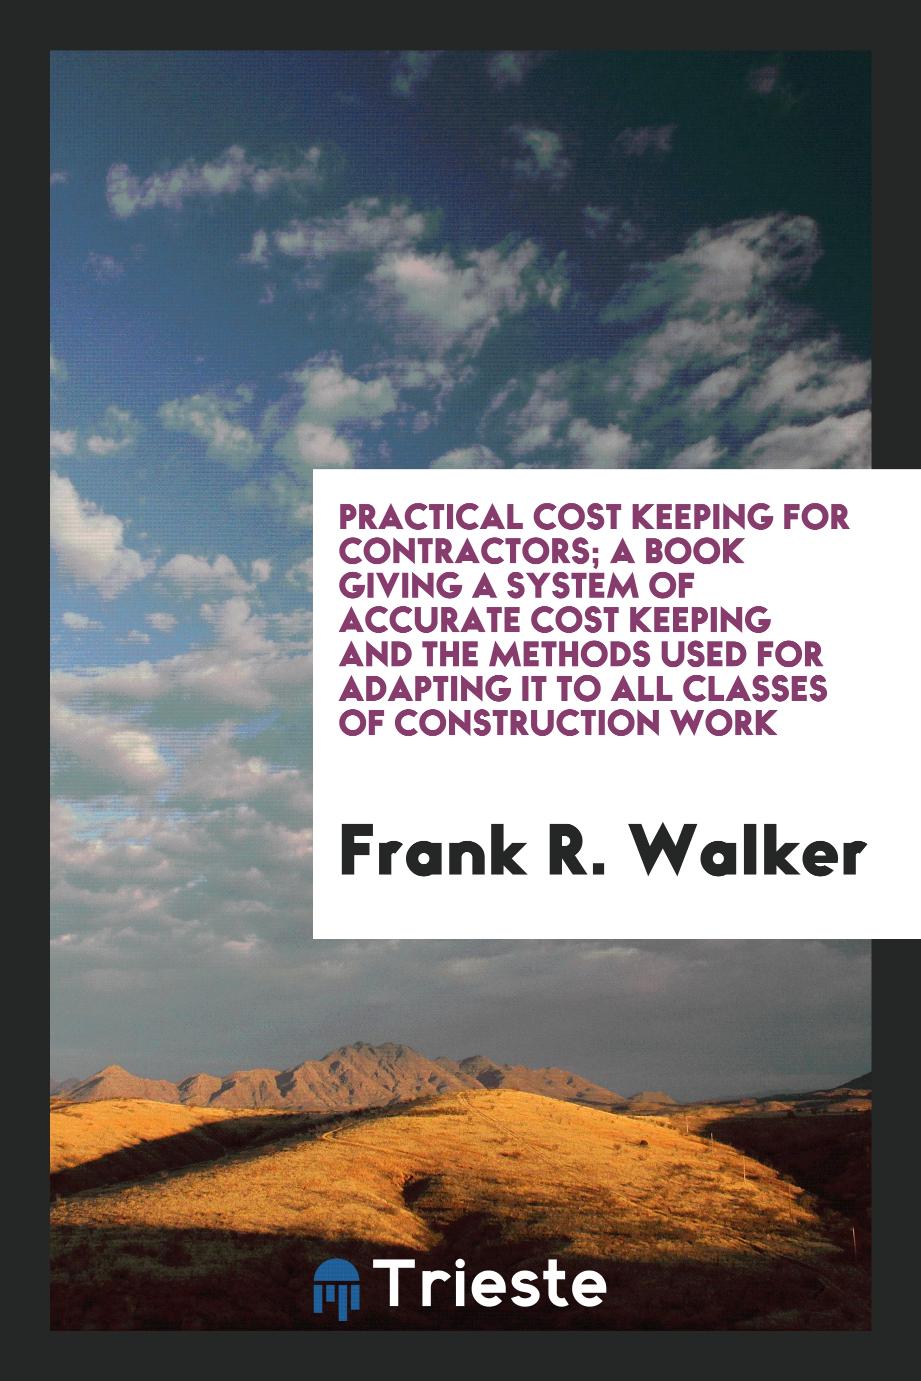 Practical cost keeping for contractors; a book giving a system of accurate cost keeping and the methods used for adapting it to all classes of construction work